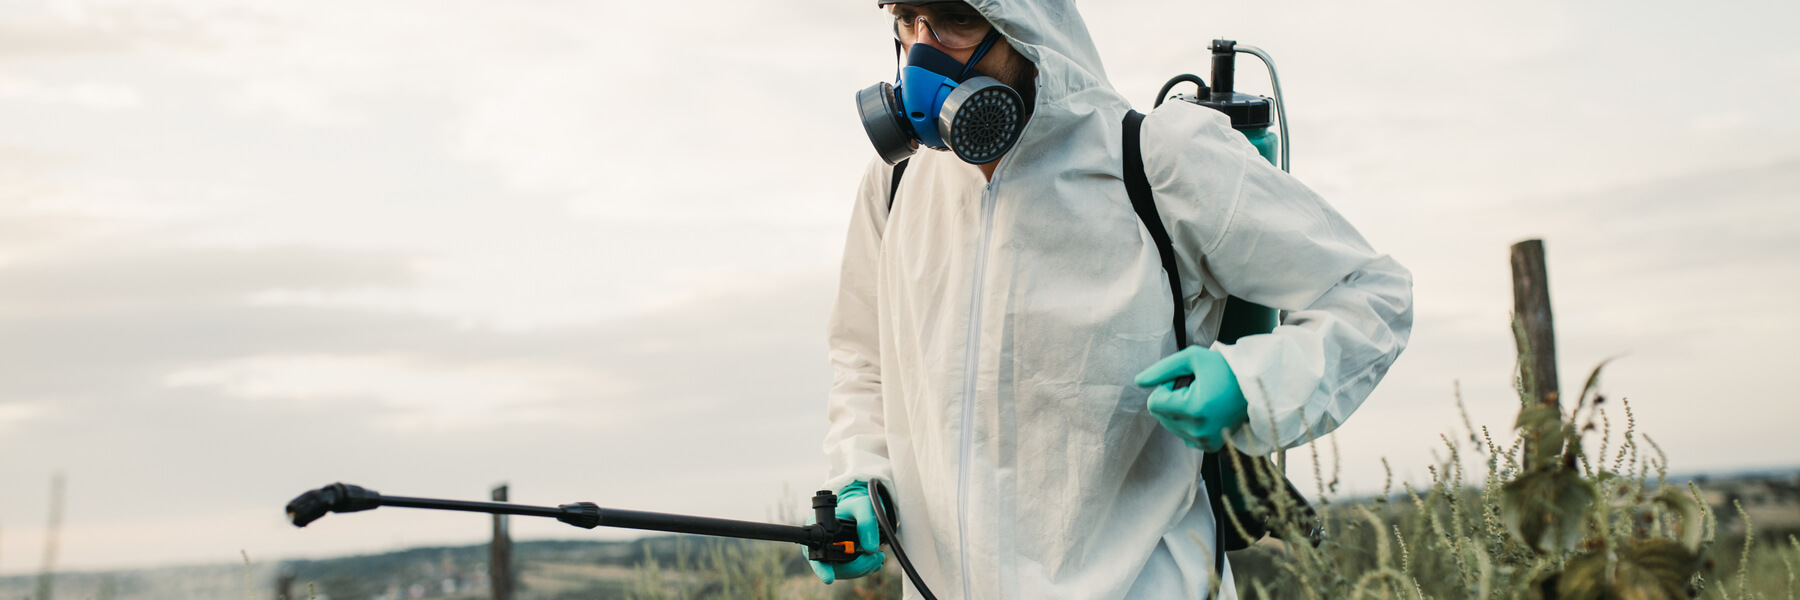 worker in PPE spraying herbicide